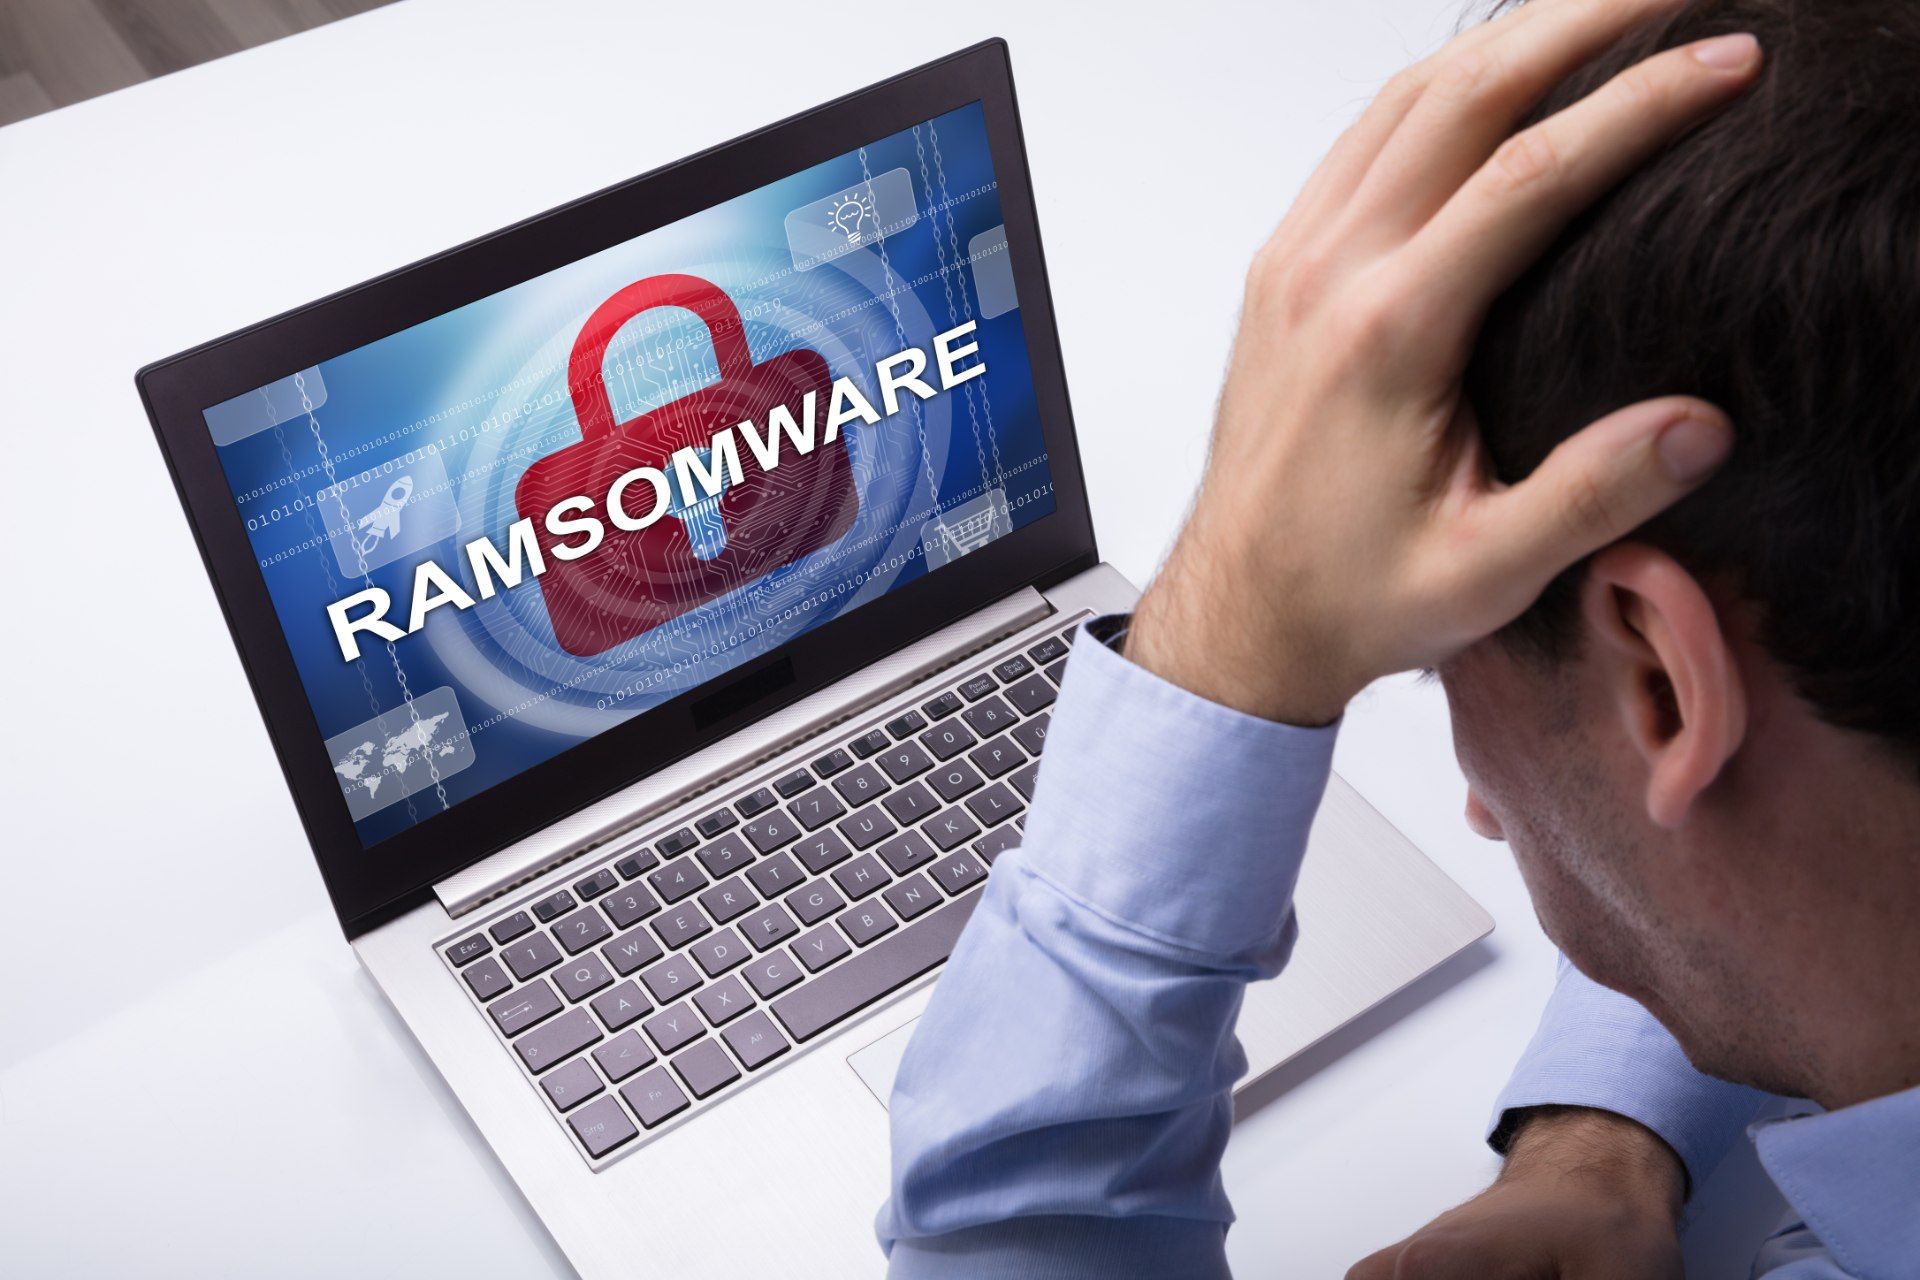 A man sits with his head in his hand while looking at a "ransomware" screen on his laptop - blackbaud ransomware attack